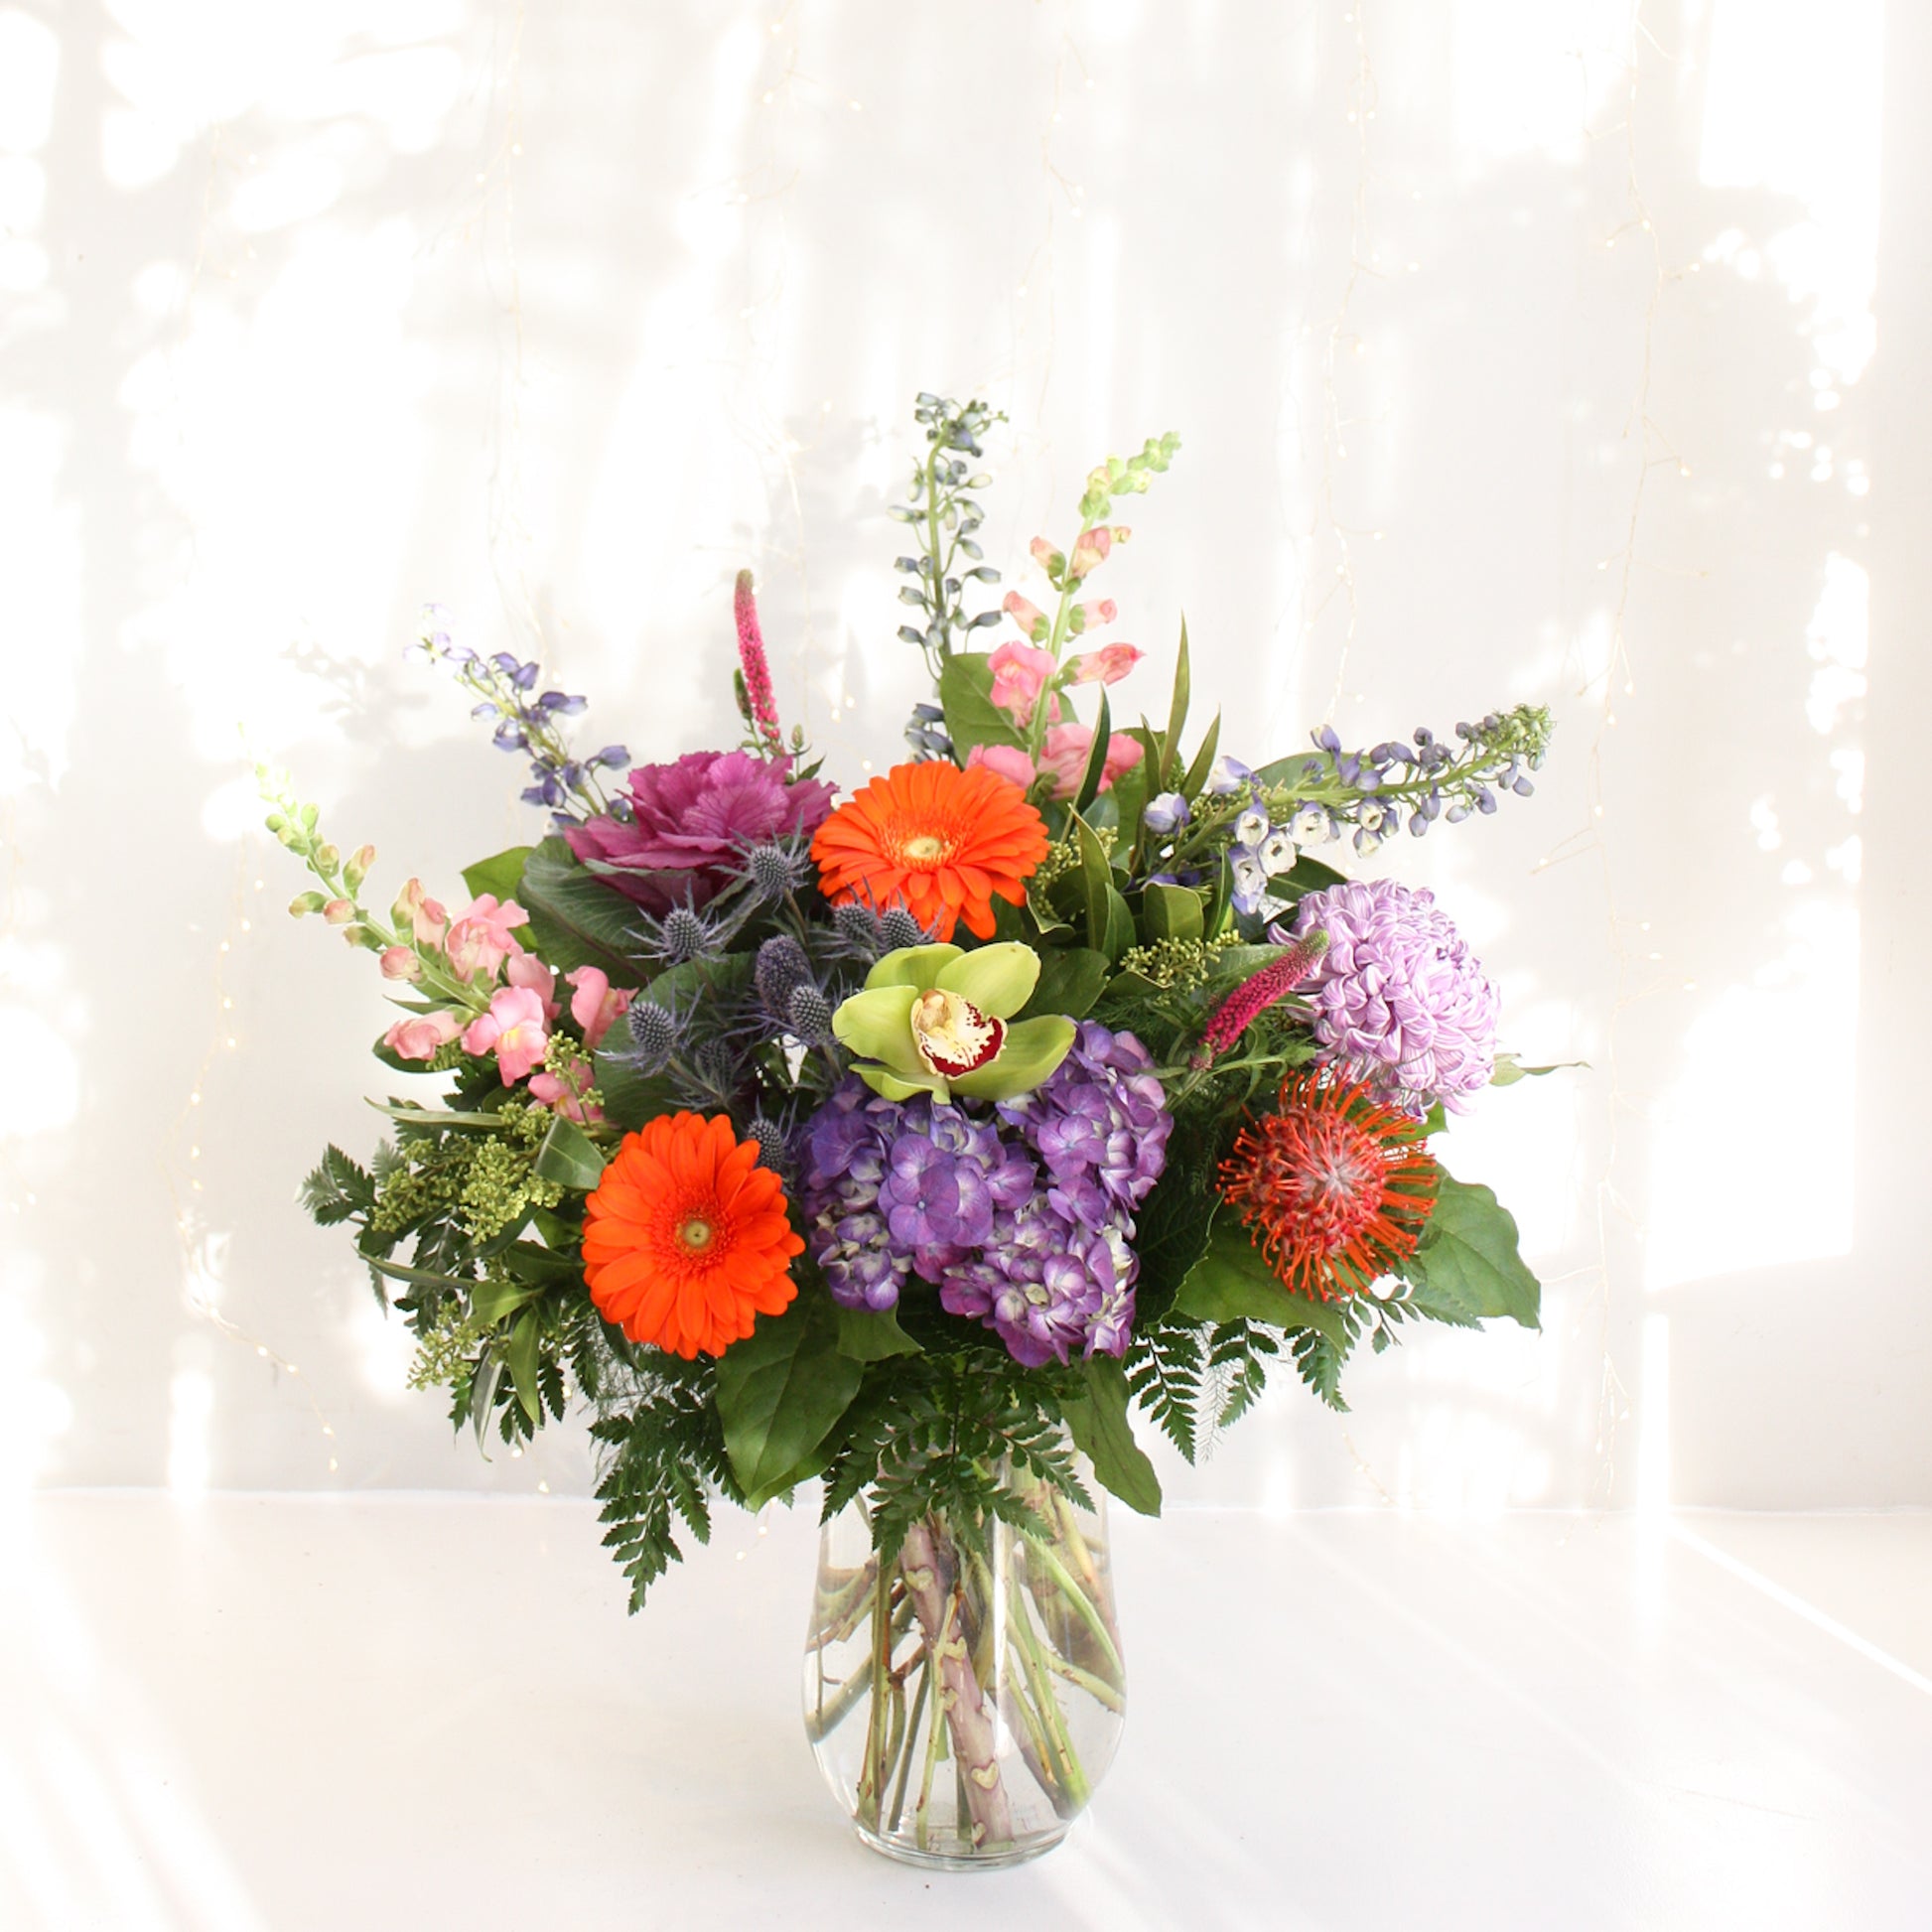 selection of bright and bold flowers in tall vase arrangement hydrangea roses eucalyptus. Designed at oleander floral design in toronto offering same day delivery